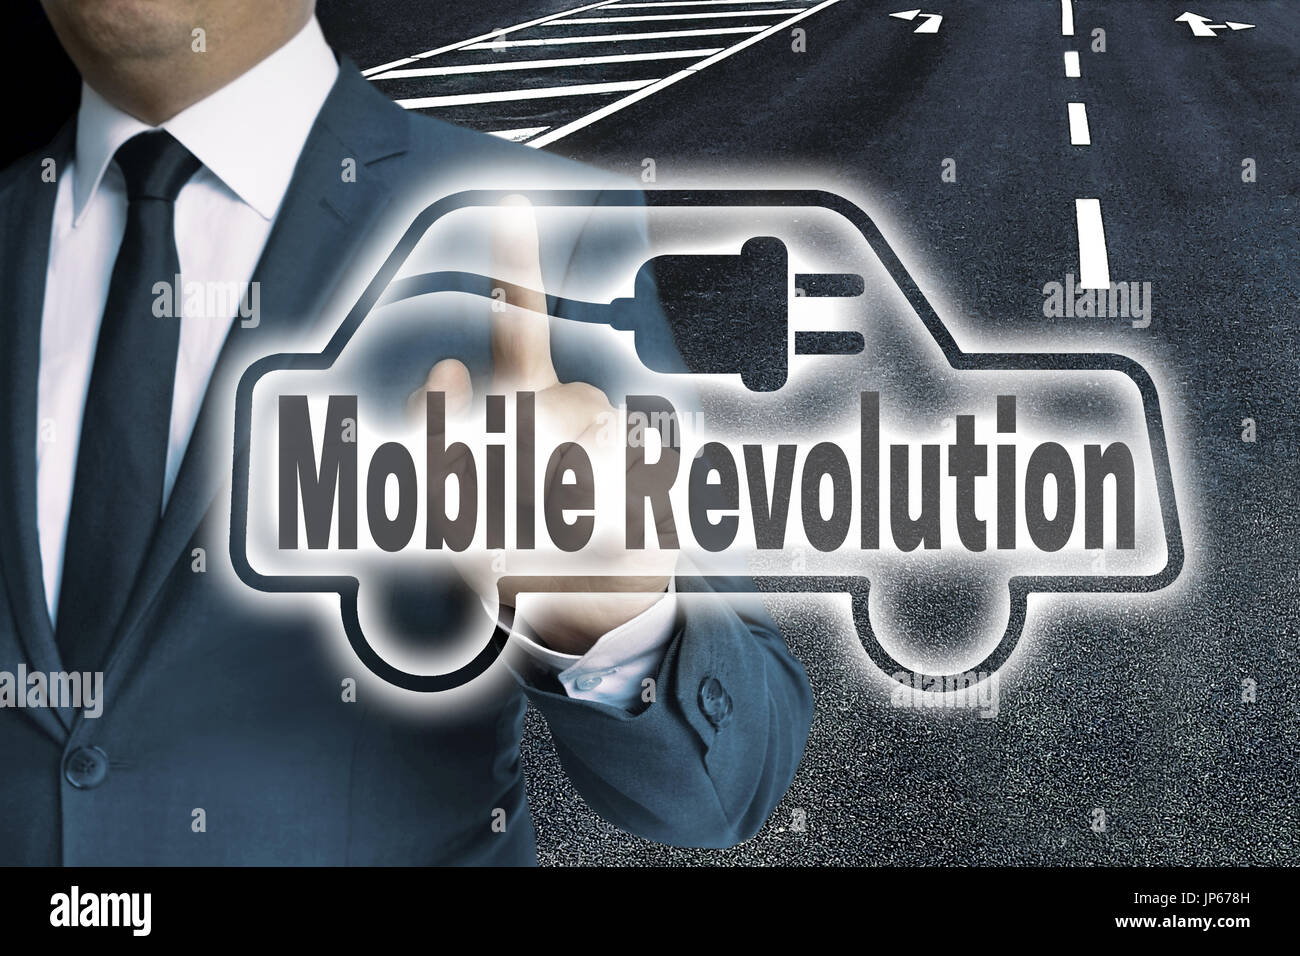 Mobile Revolution Auto touchscreen is man-operated concept. Stock Photo